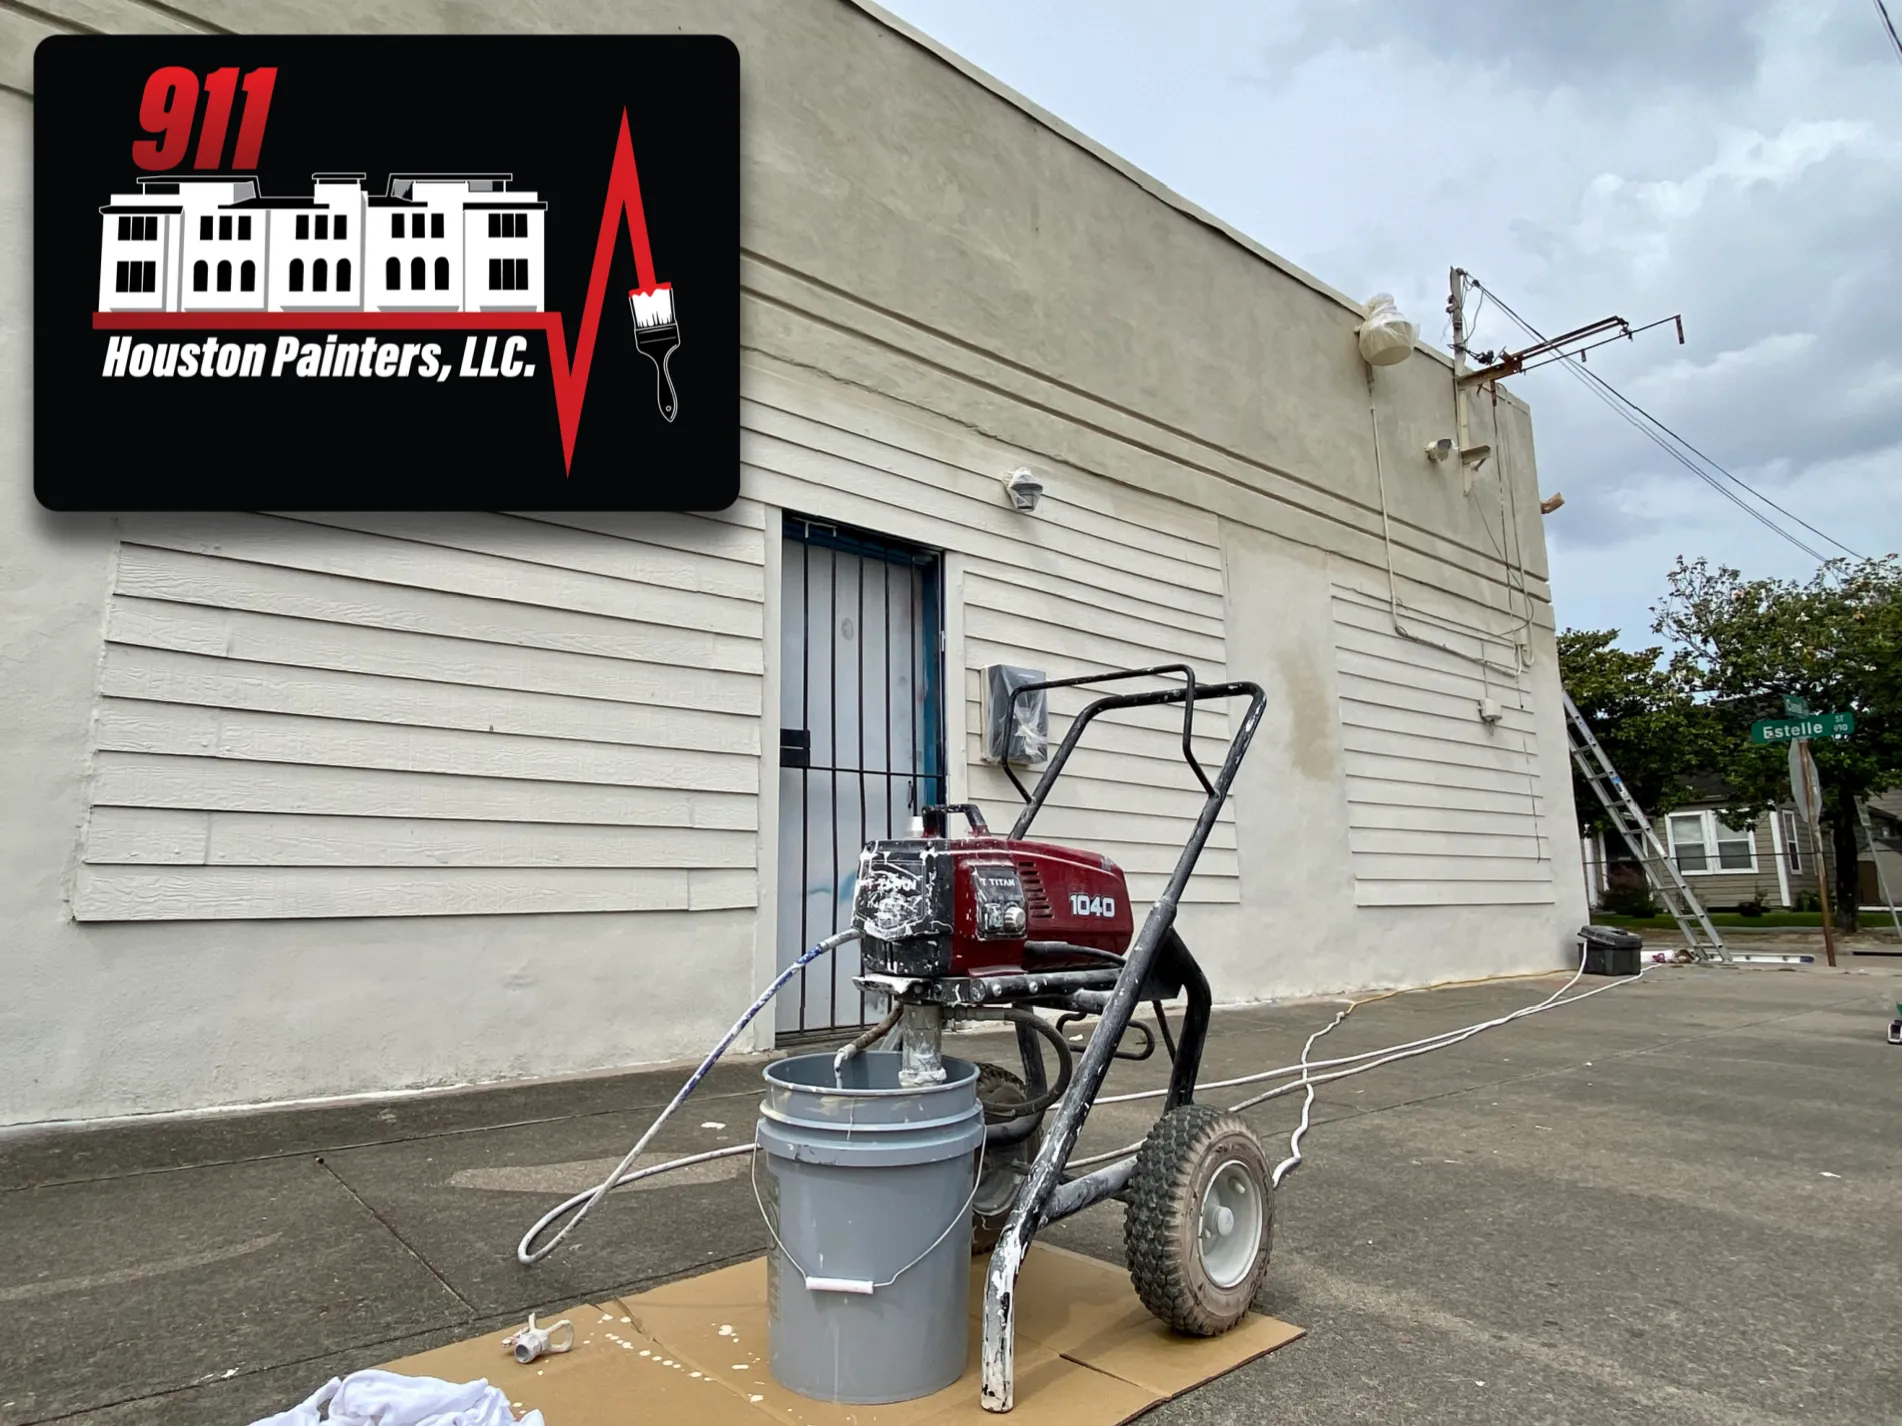 Exterior Painting for 911 Houston Painters, LLC in Houston, TX